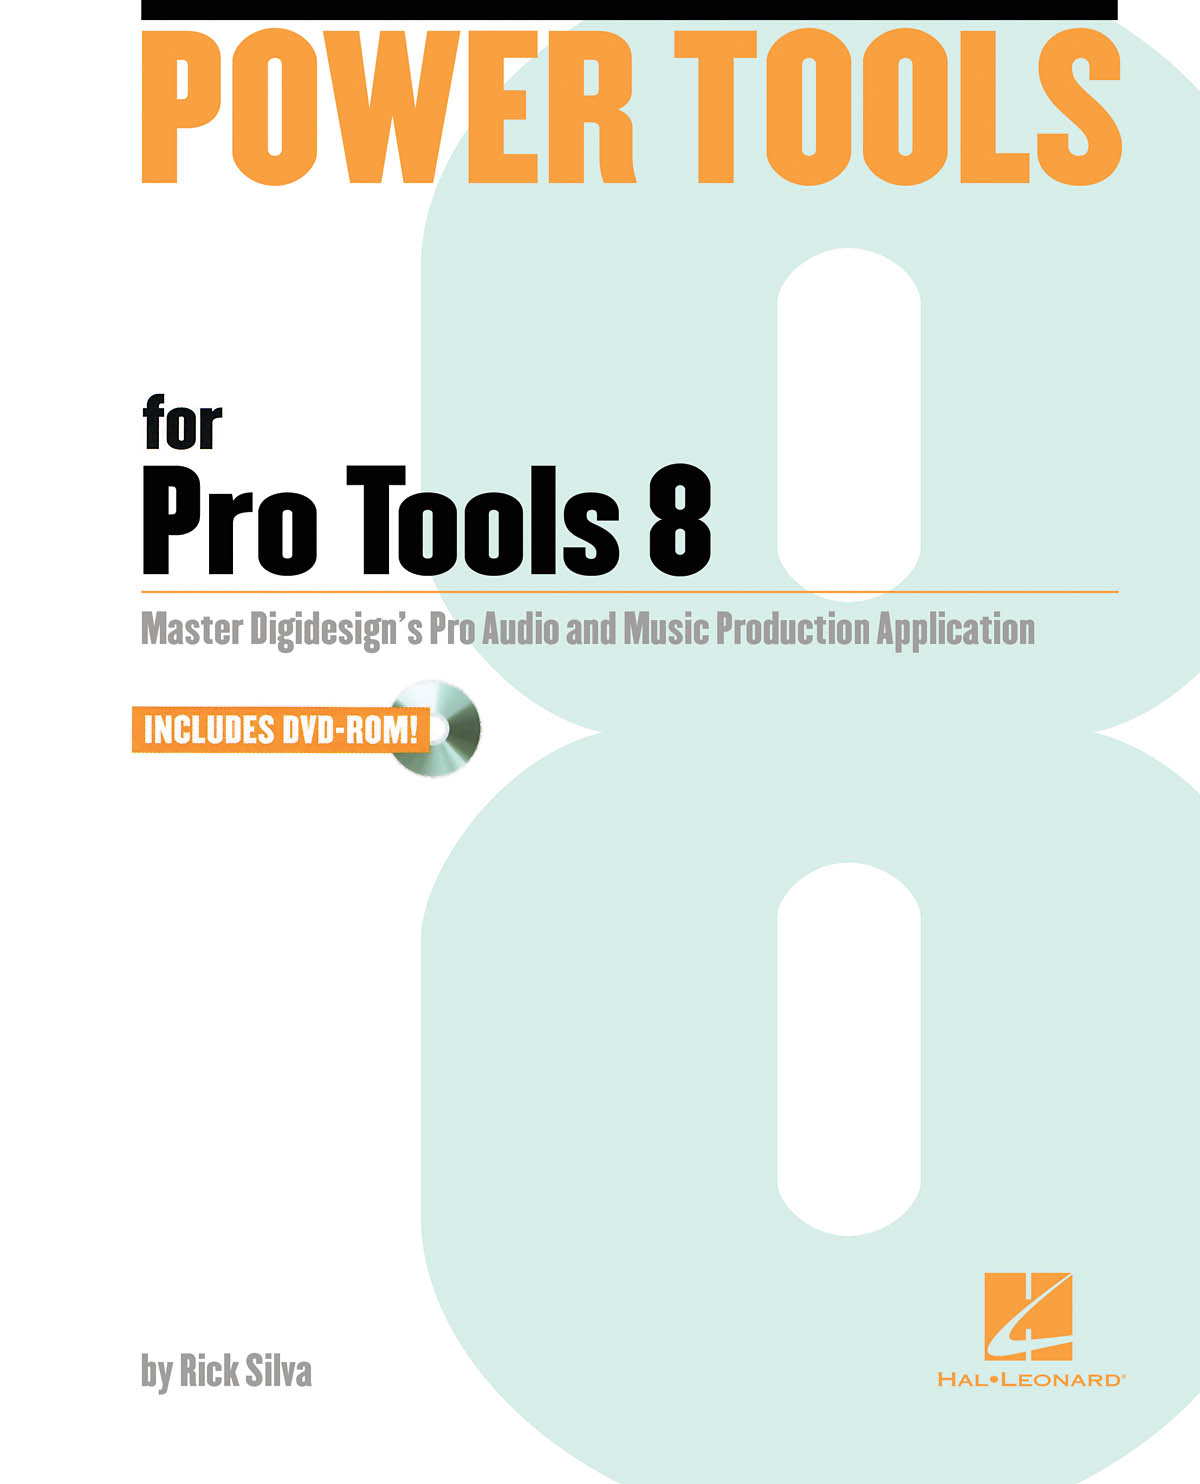 Power Tools for Pro Tools 8: Reference Books